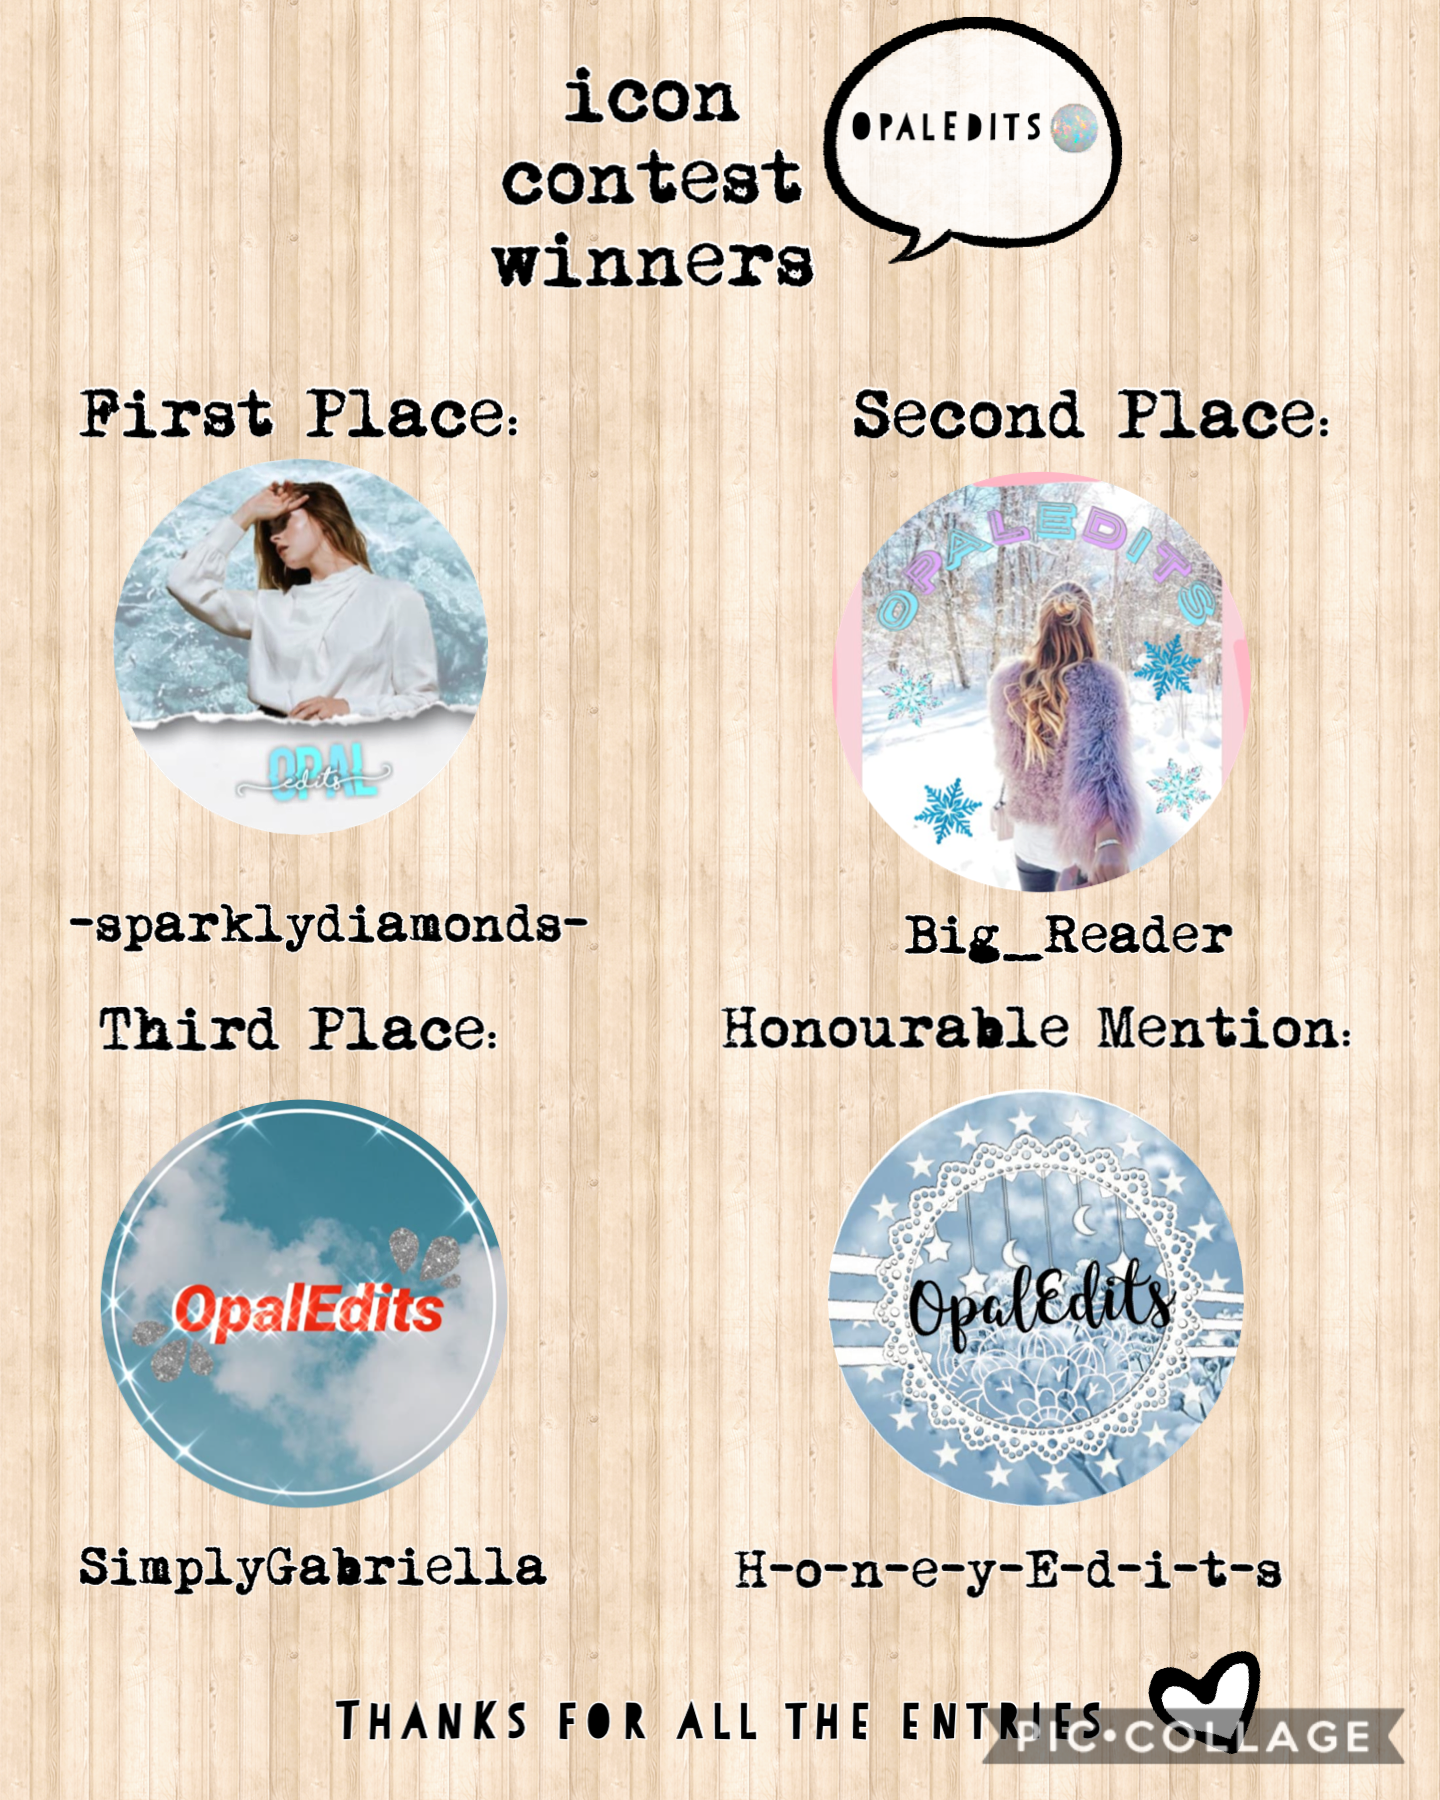 Opal Edits Icon Contest Results Did U Place?